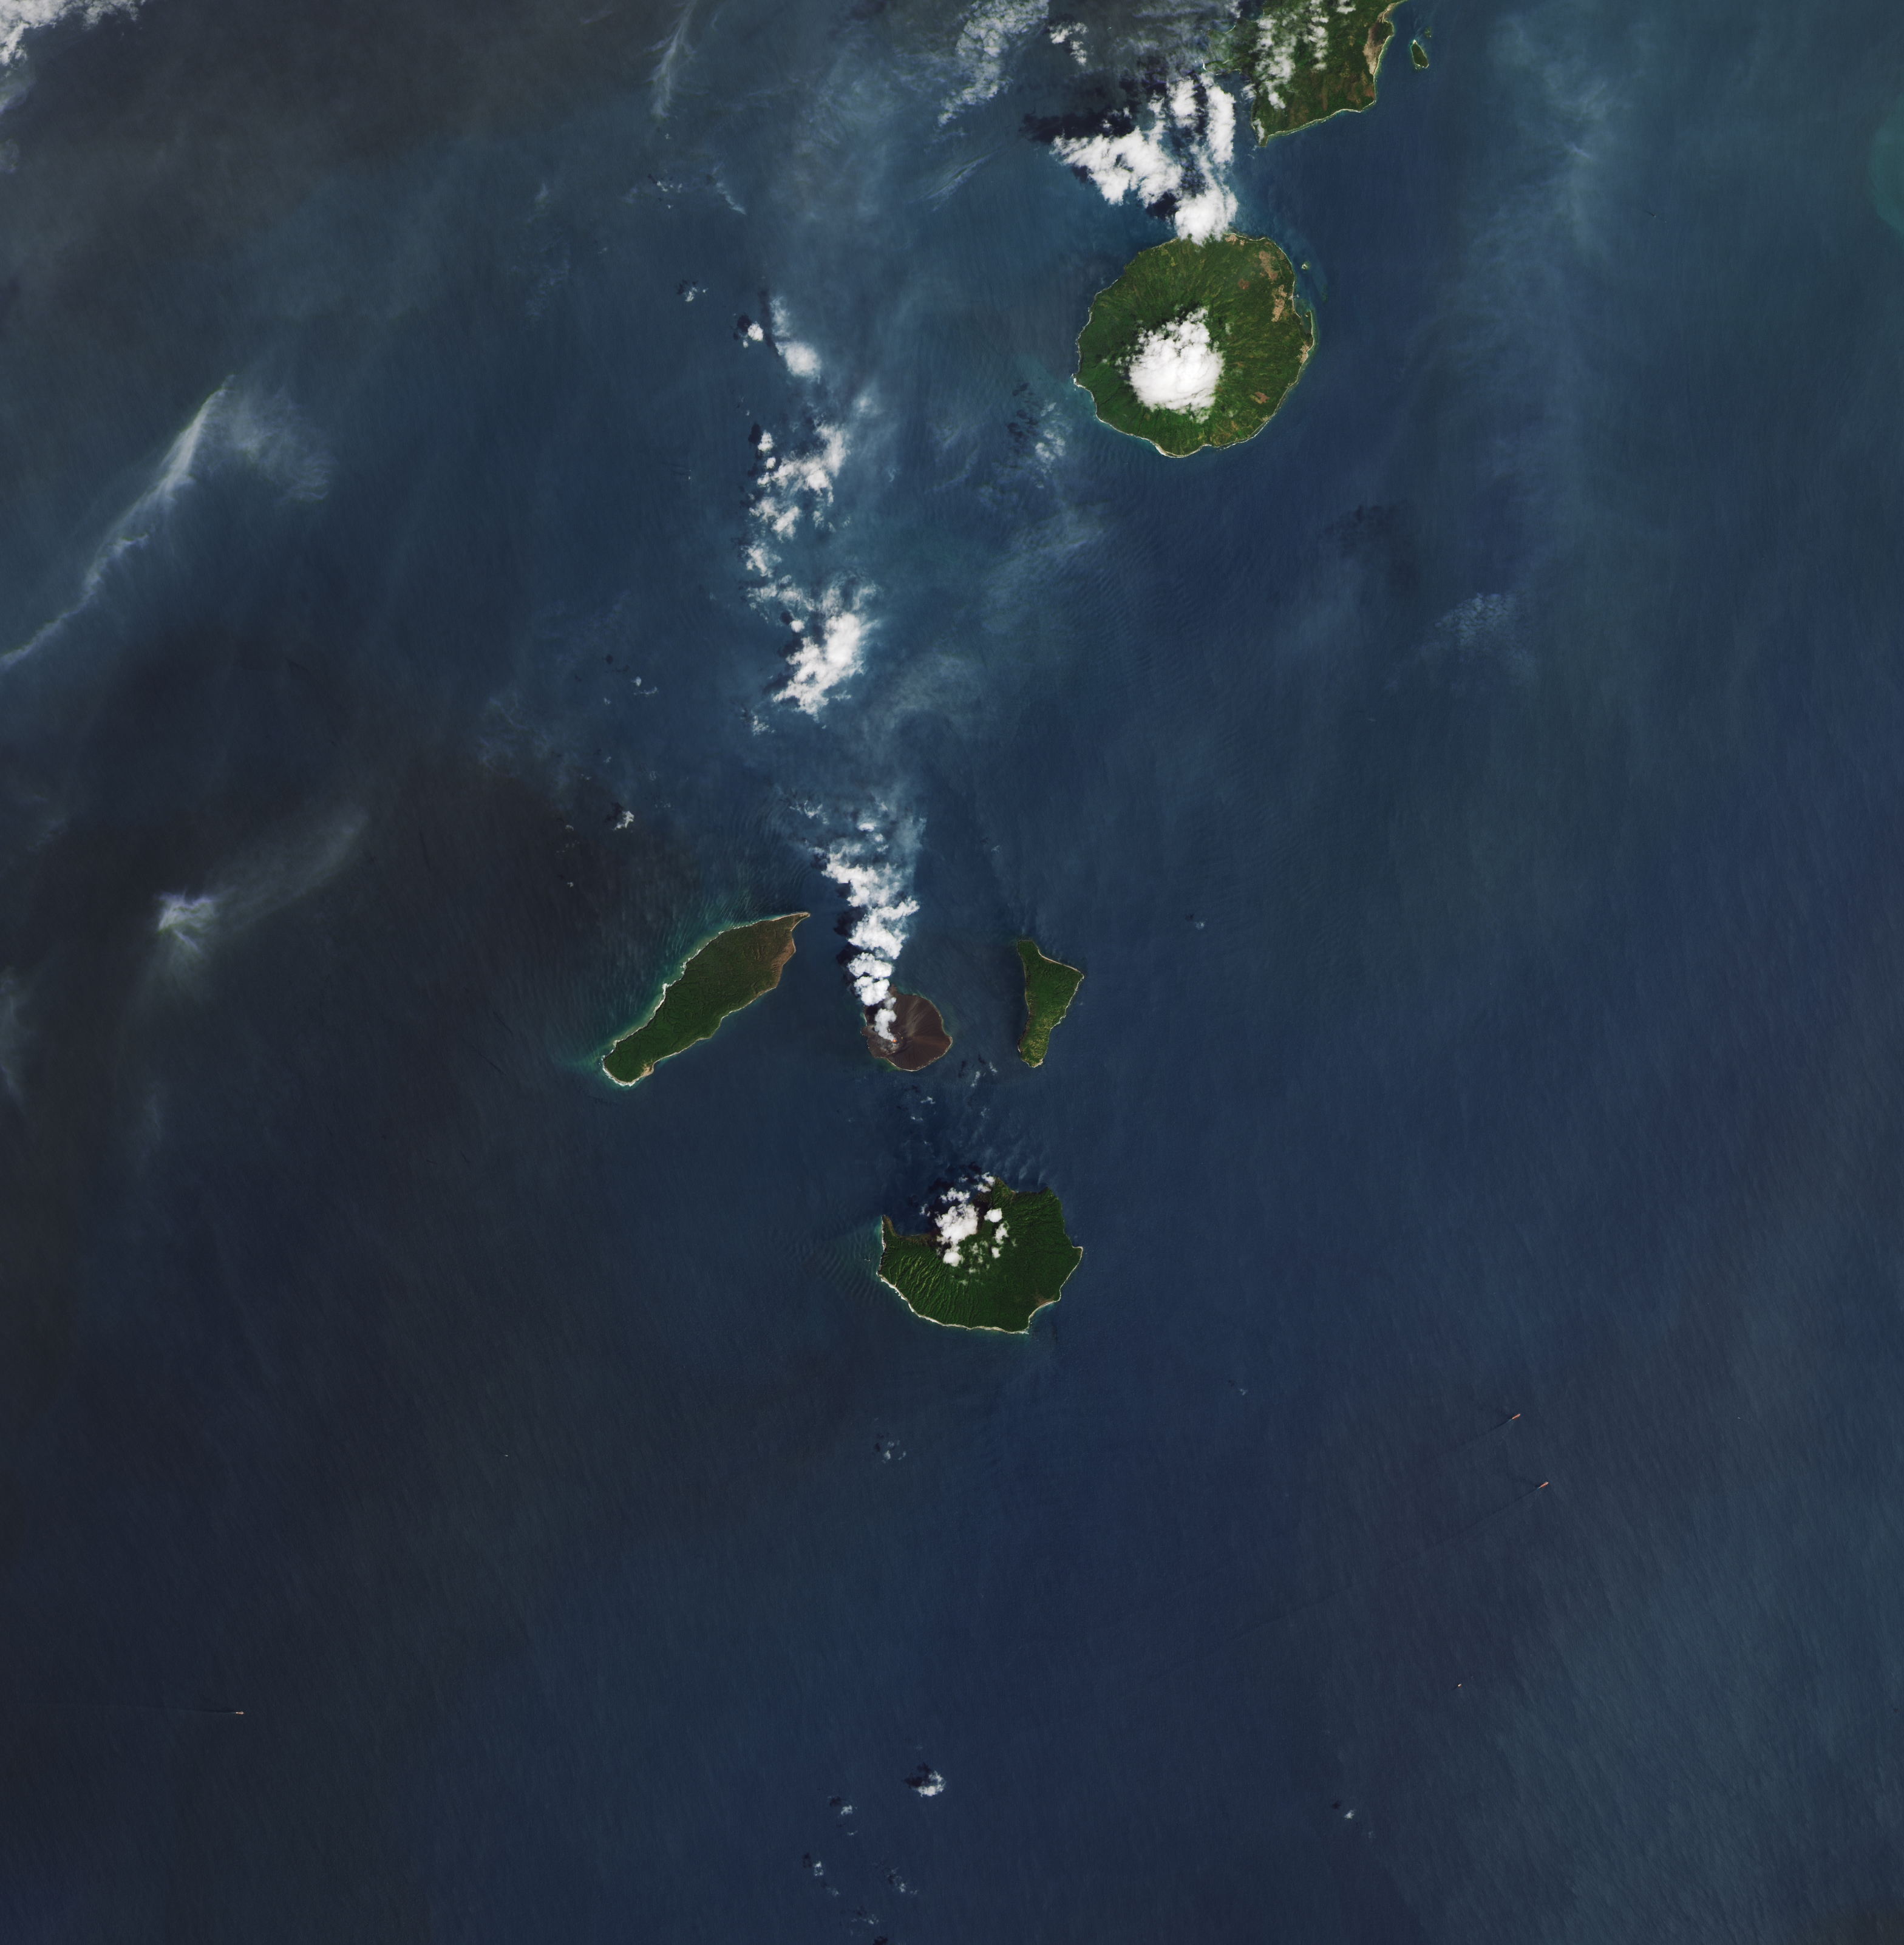 Arial shot of three islands, the center - anak krakatau, billowing smoke emits from a red spot